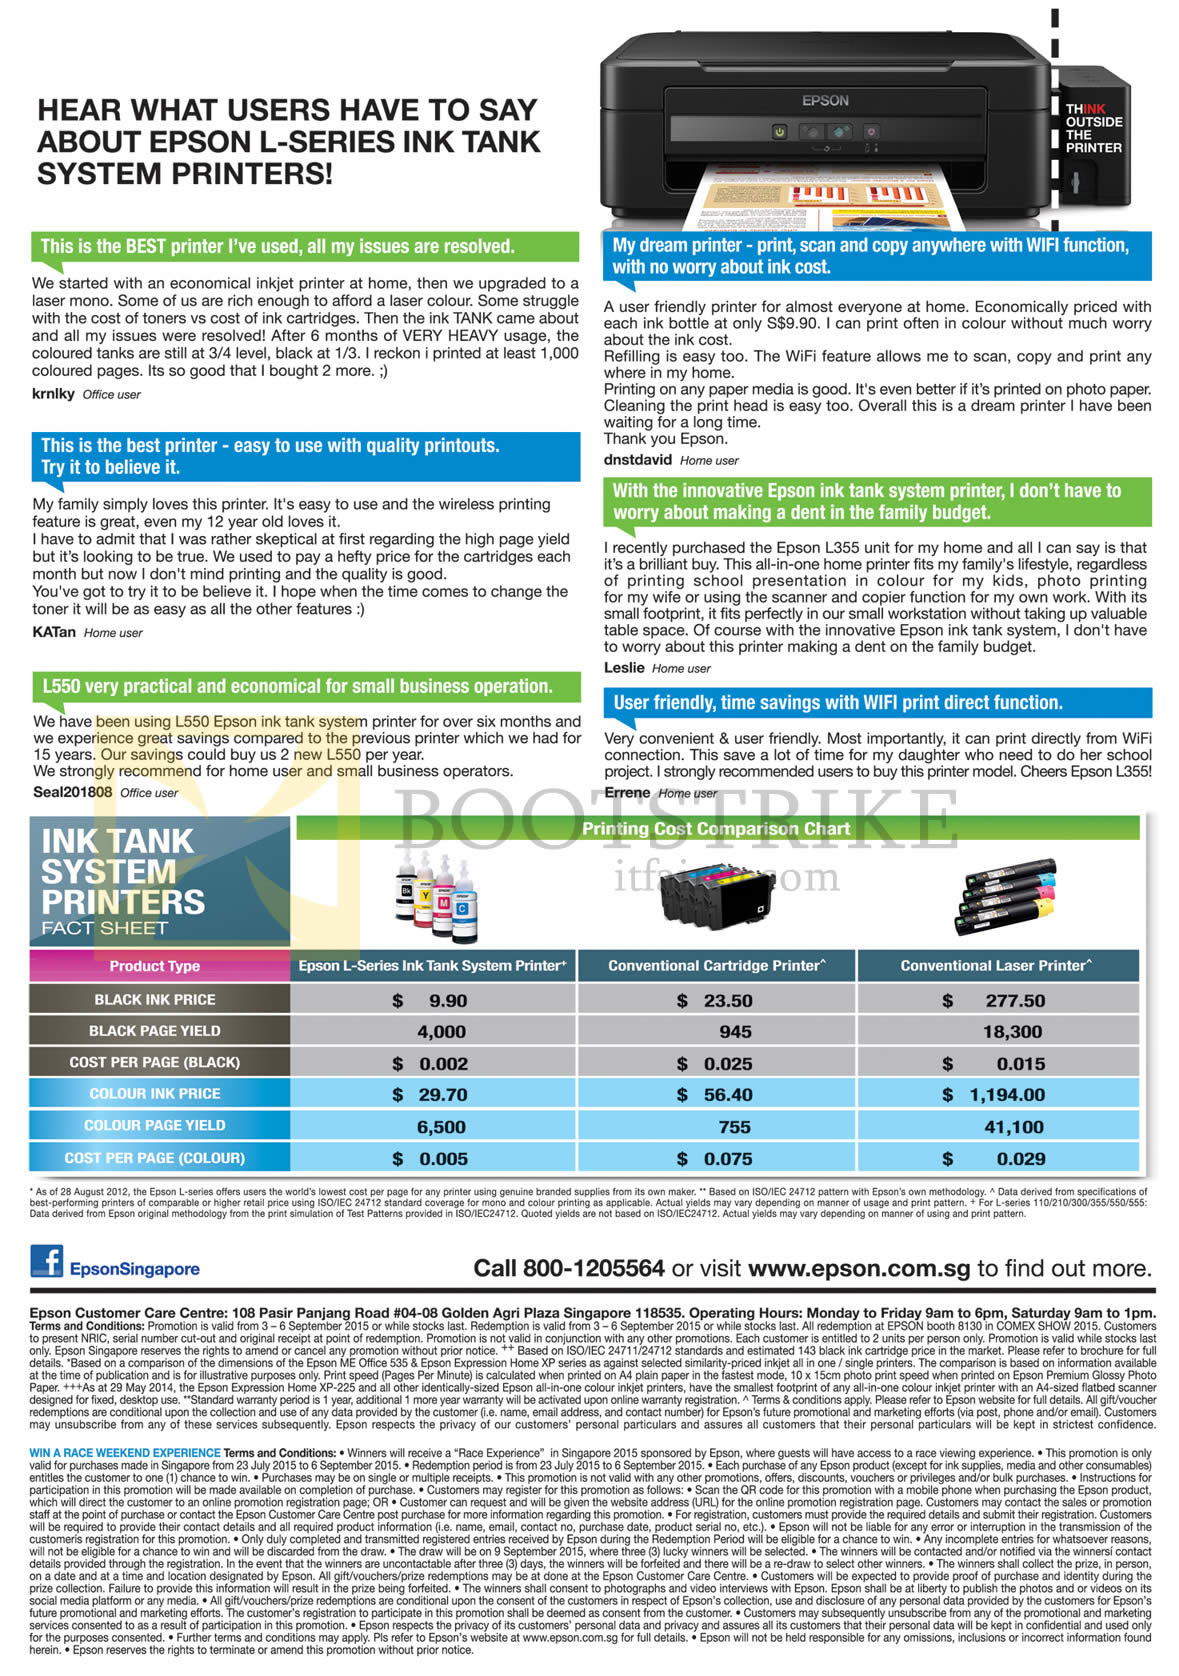 COMEX 2015 price list image brochure of Epson Printer Features